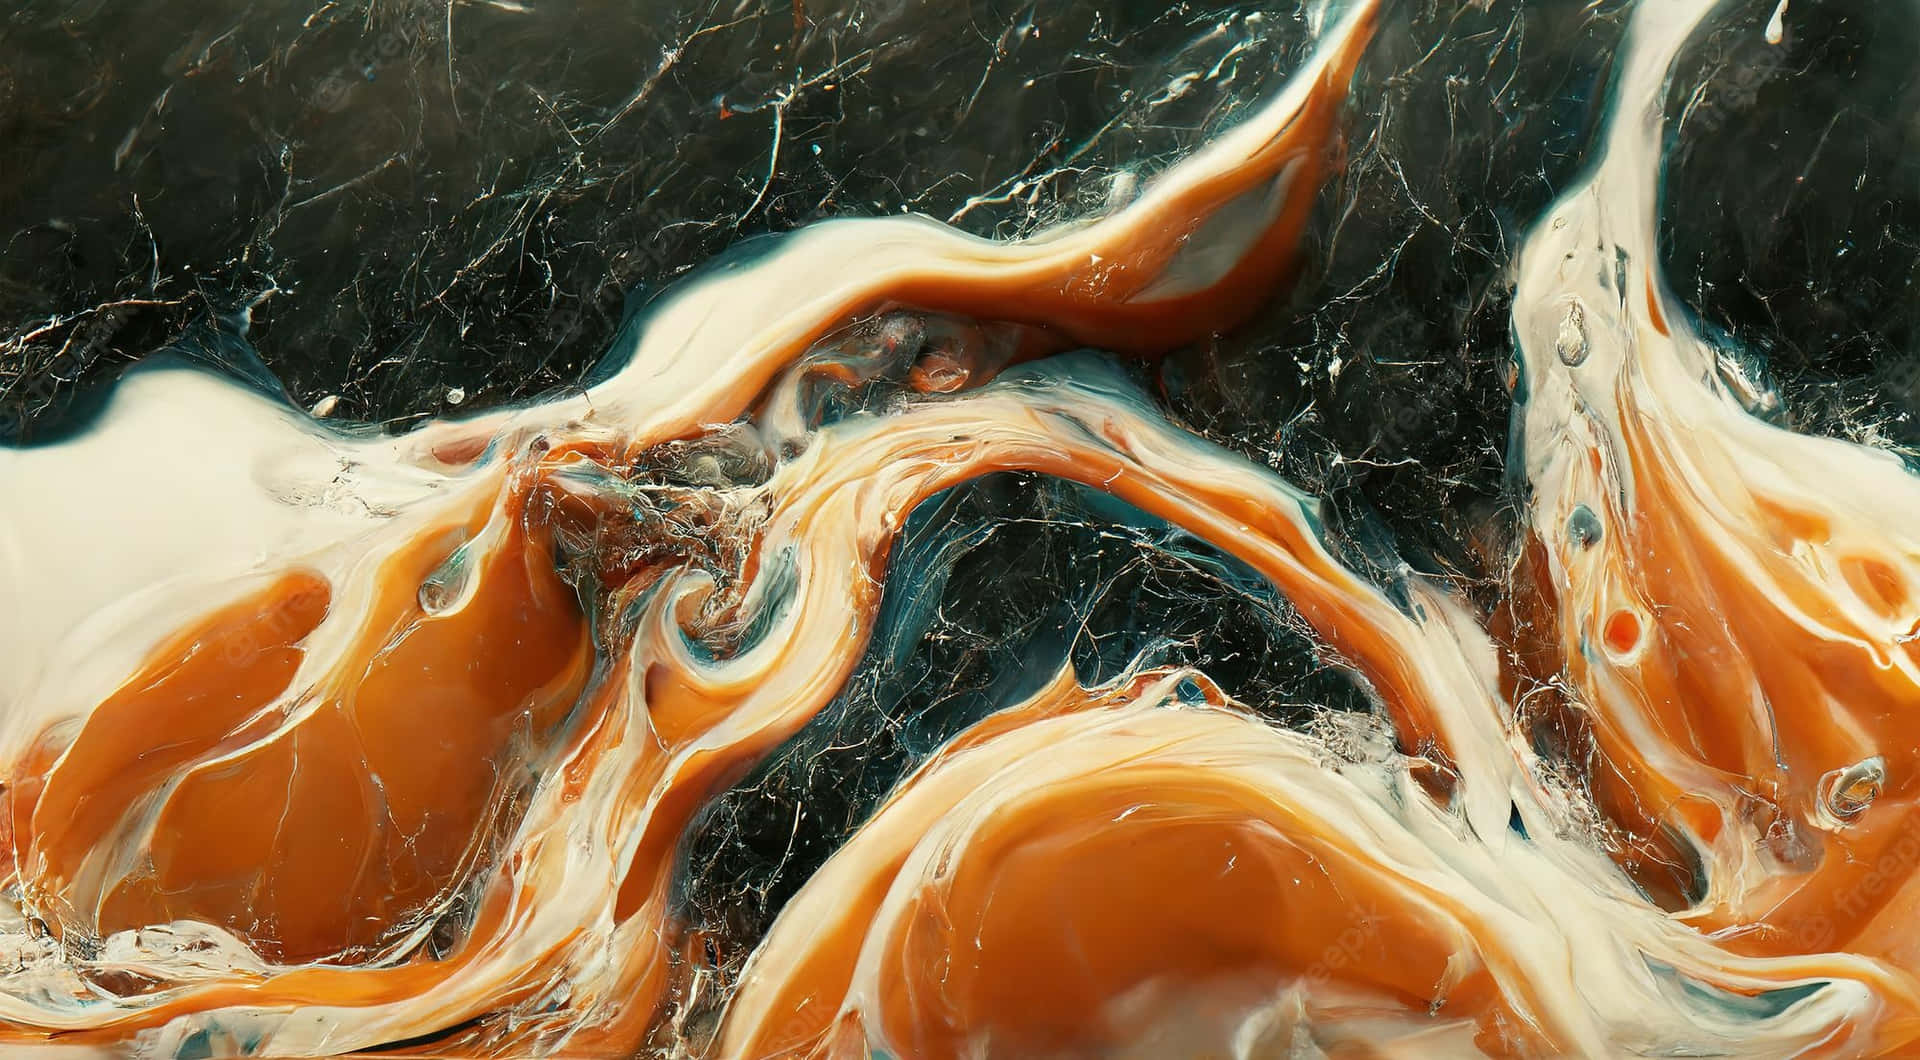 Create with style, the new Marble iPad Wallpaper